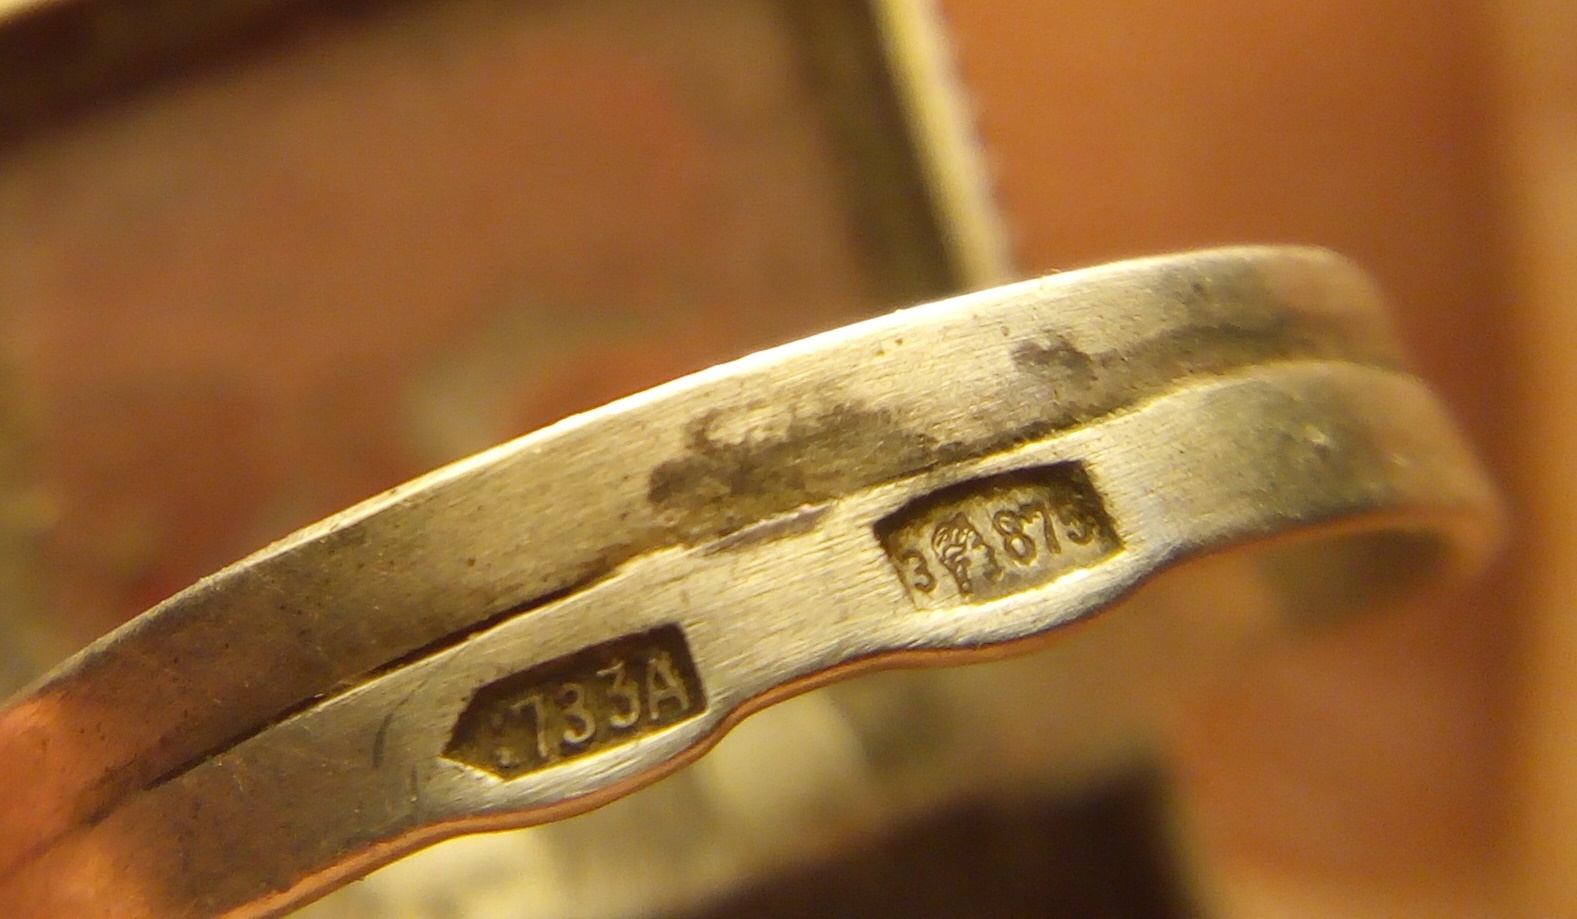 Russian ring with interesting hallmarks - www.925-1000.com